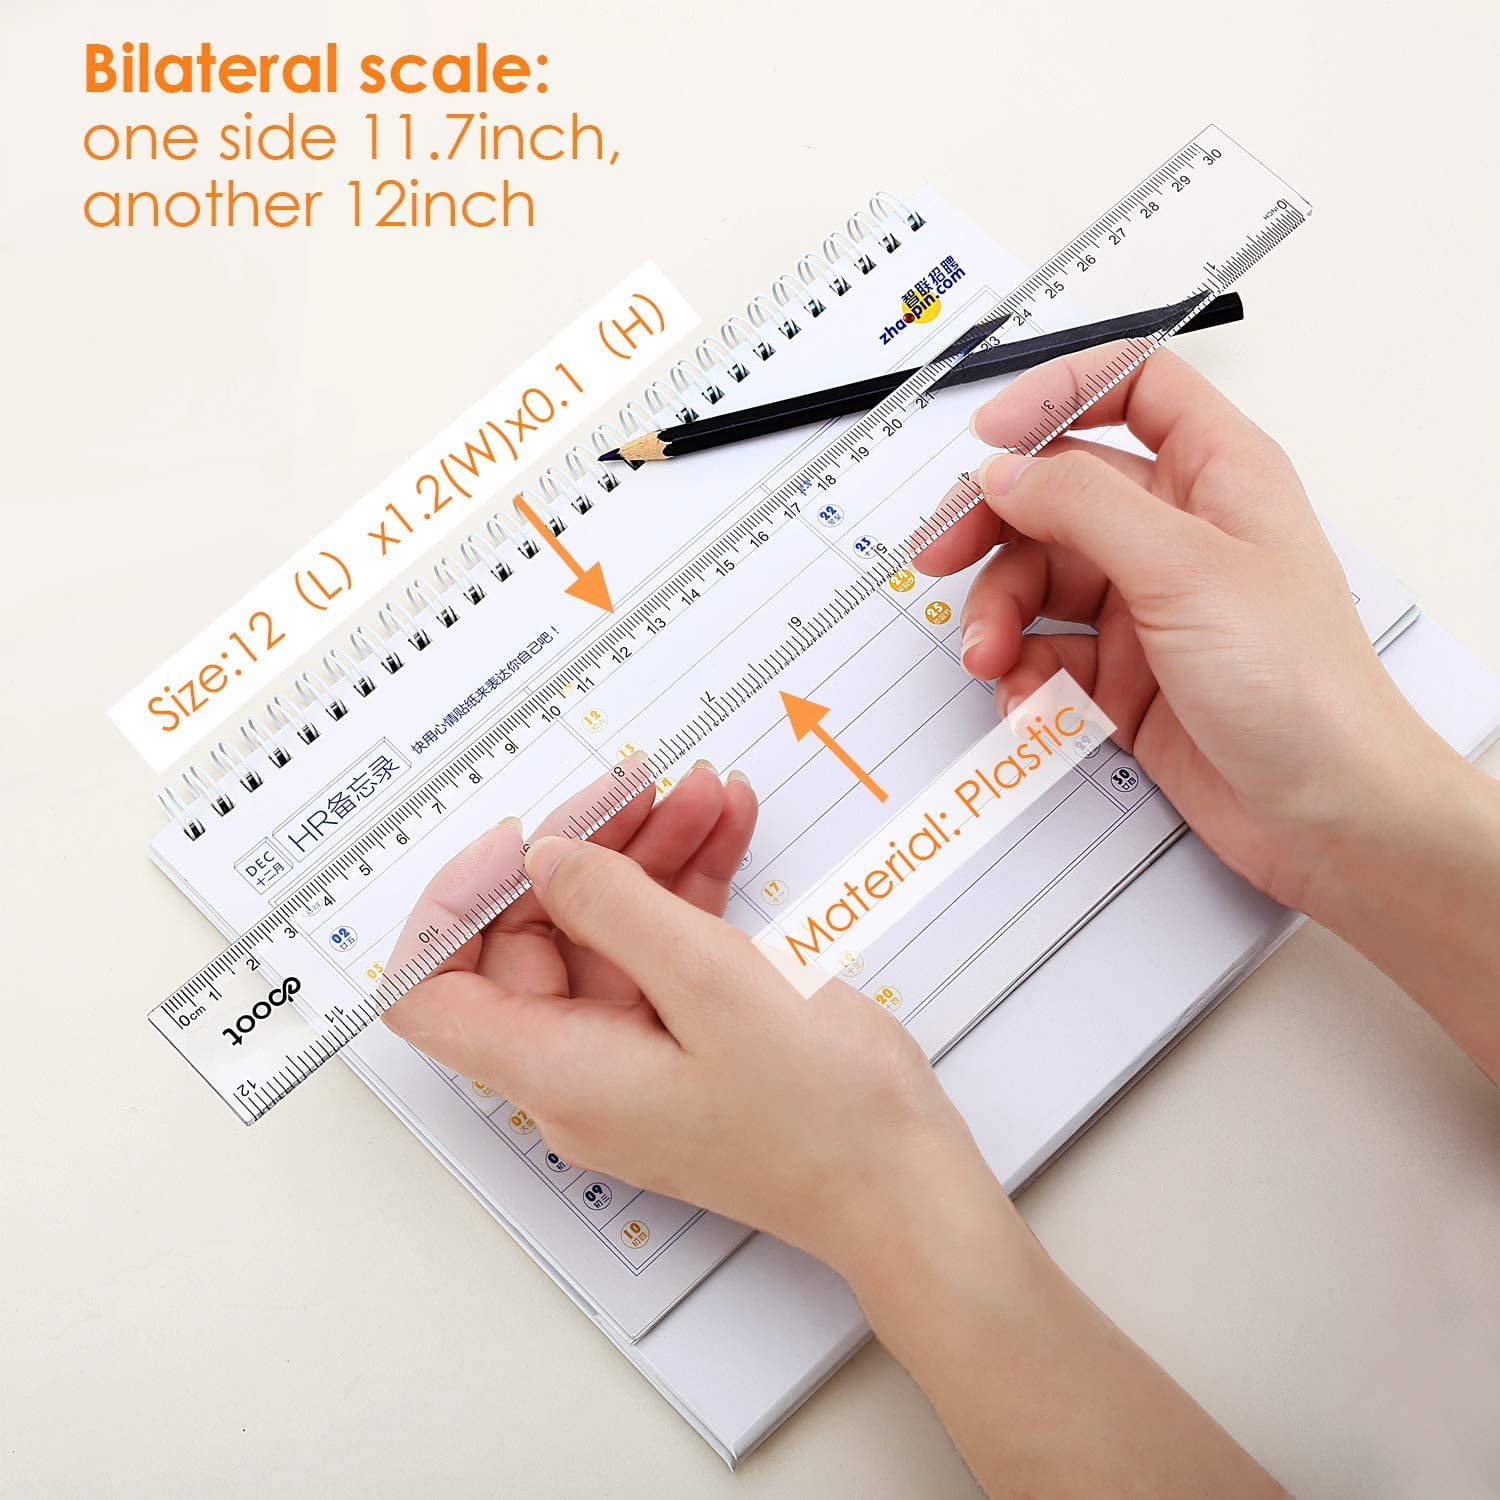 NUOBESTY Splited Classroom Ruler Plastic Long Math Teaching Ruler Blackboard Whiteboard Measuring Tool with Handle for Office School Home